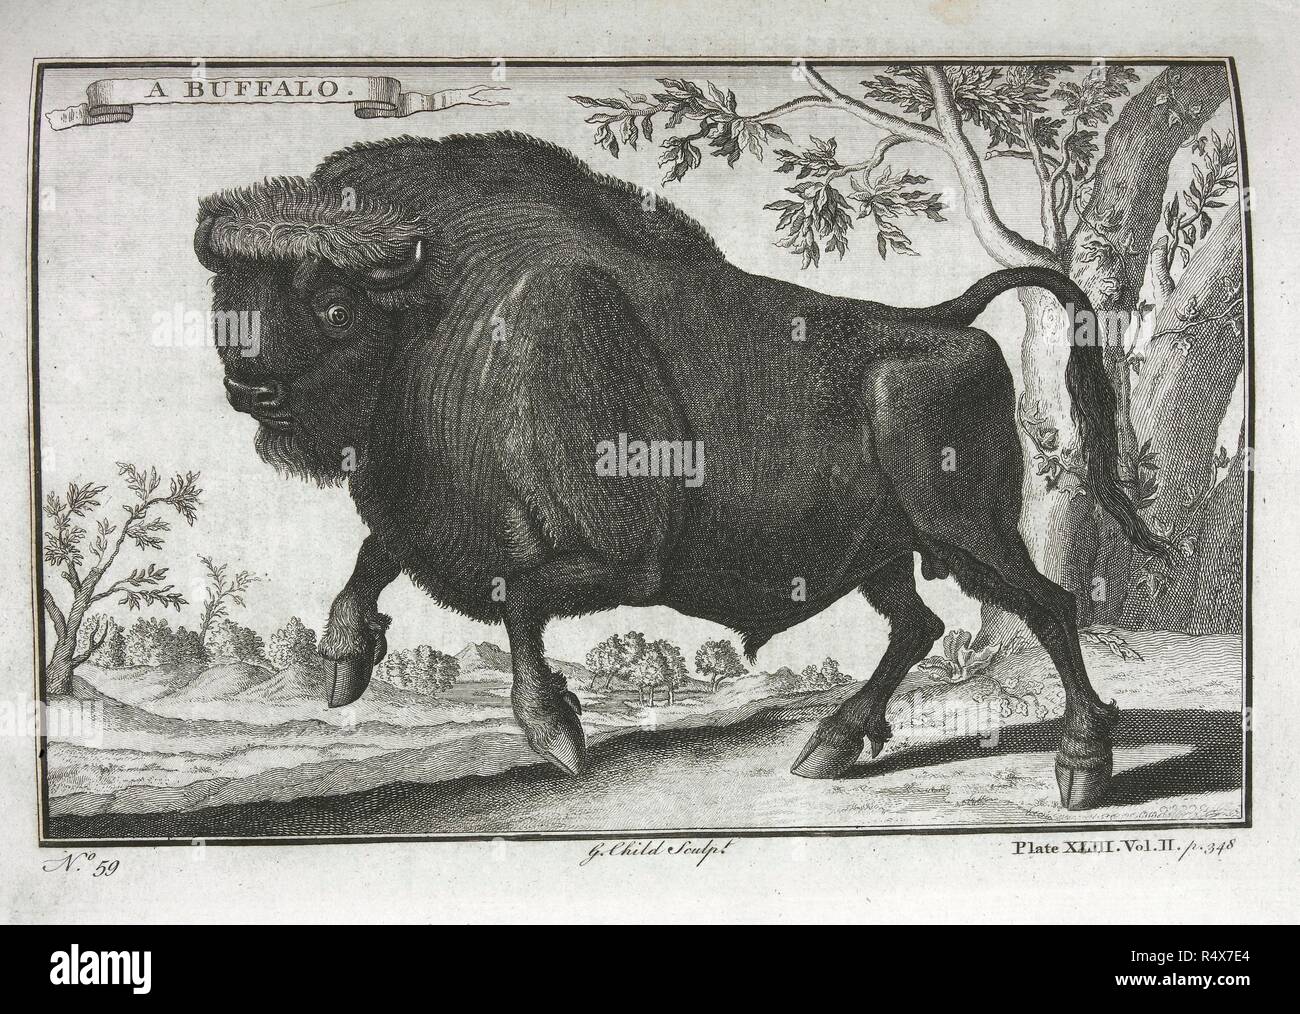 A buffalo. A New General Collection of Voyages and Travels .. London :  Thomas Astley, 1745-47. Source: 2354.h.8.(2), plate 43. Language: English  Stock Photo - Alamy